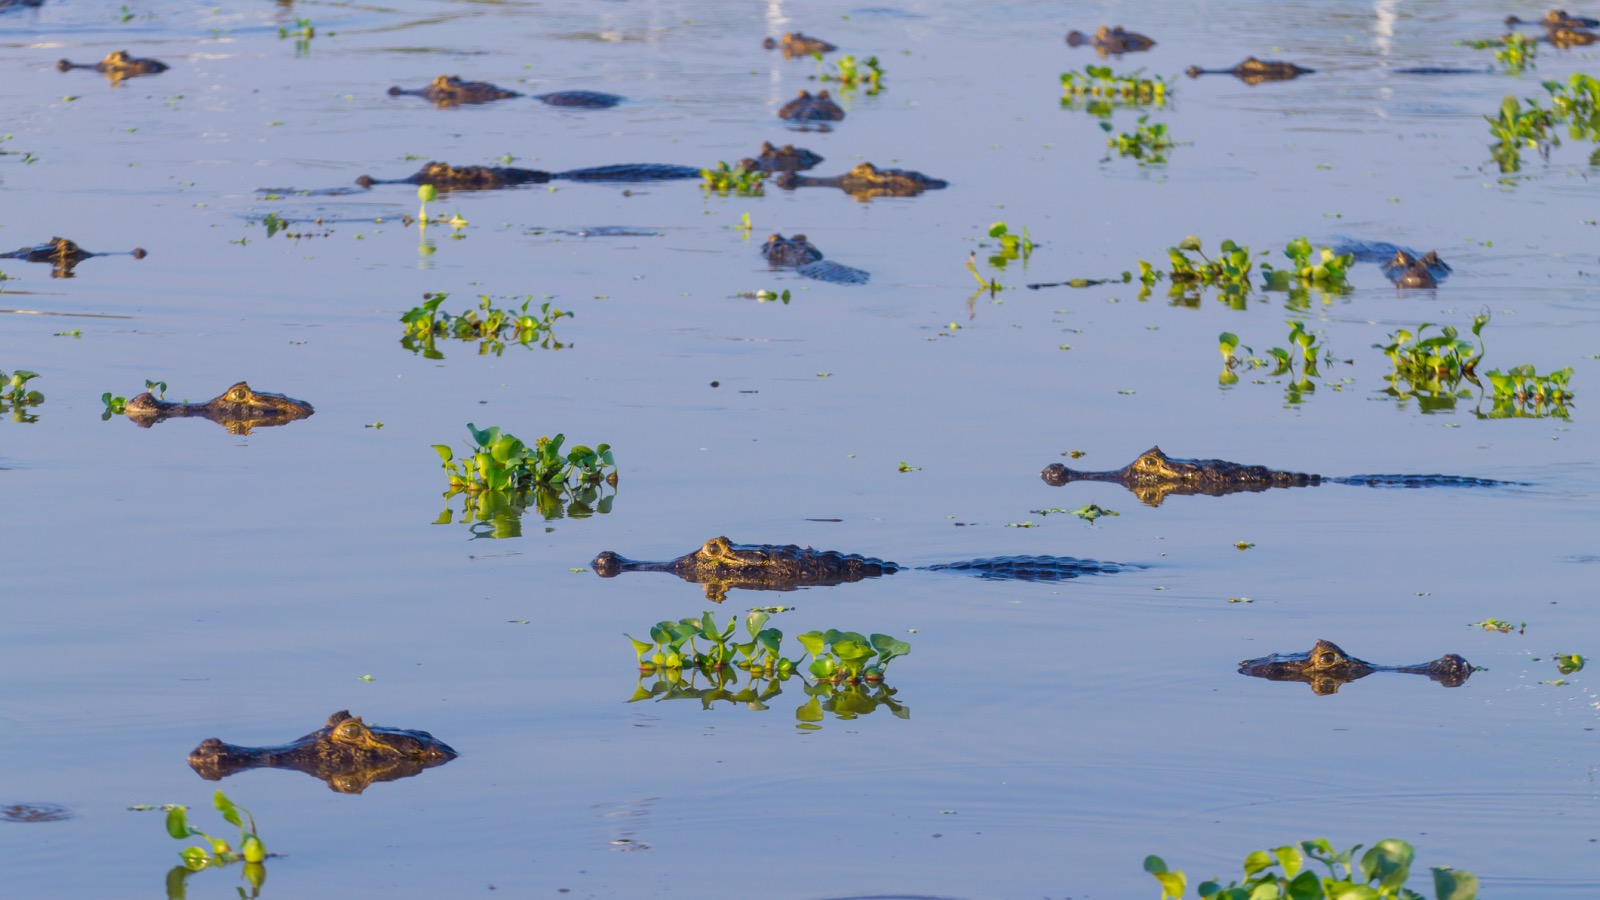 Amazon caimans in the water in the Amazon River basin